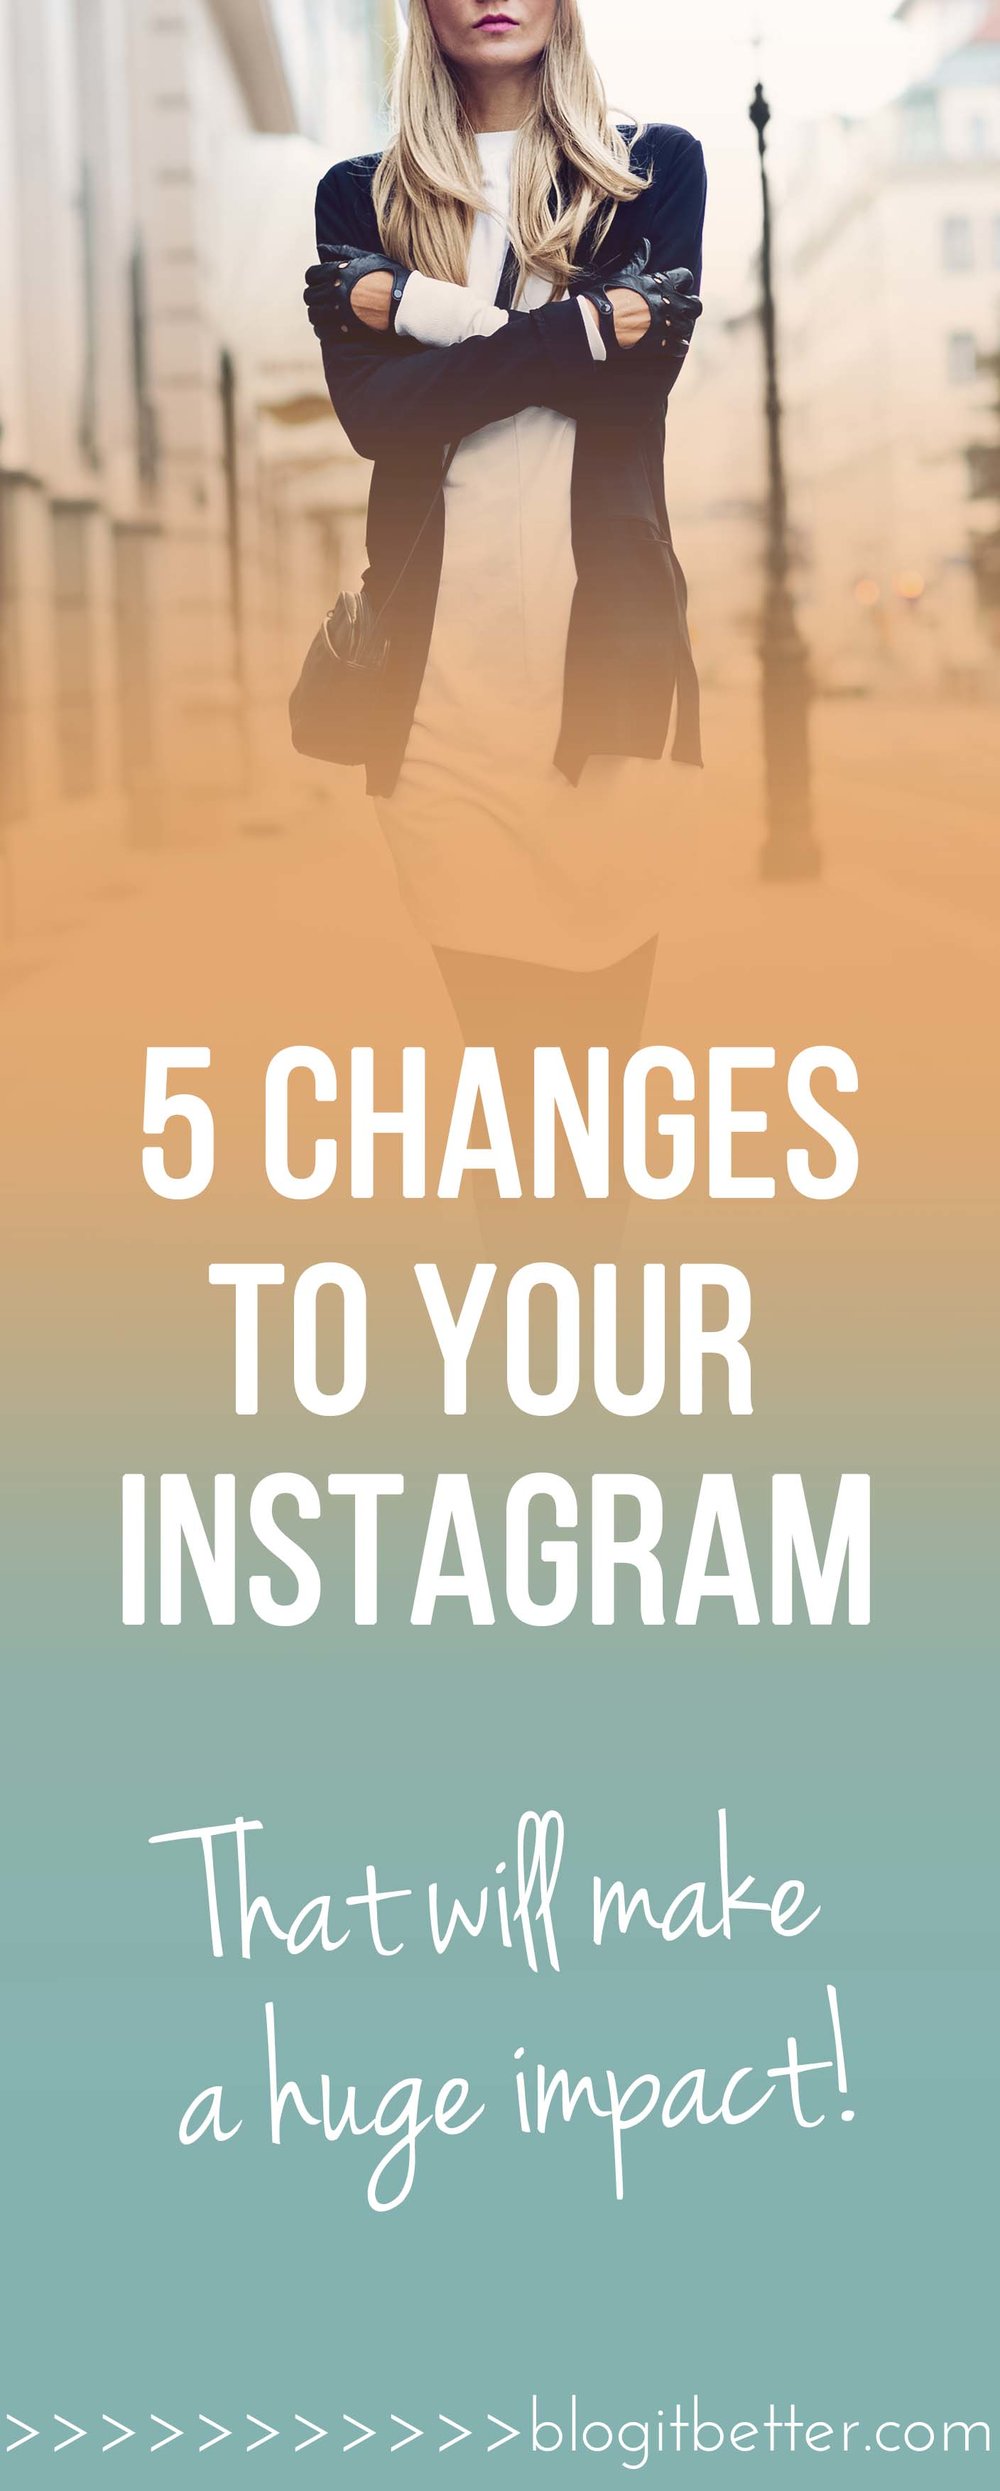 5 changes to your Instagram account that will increase your following!